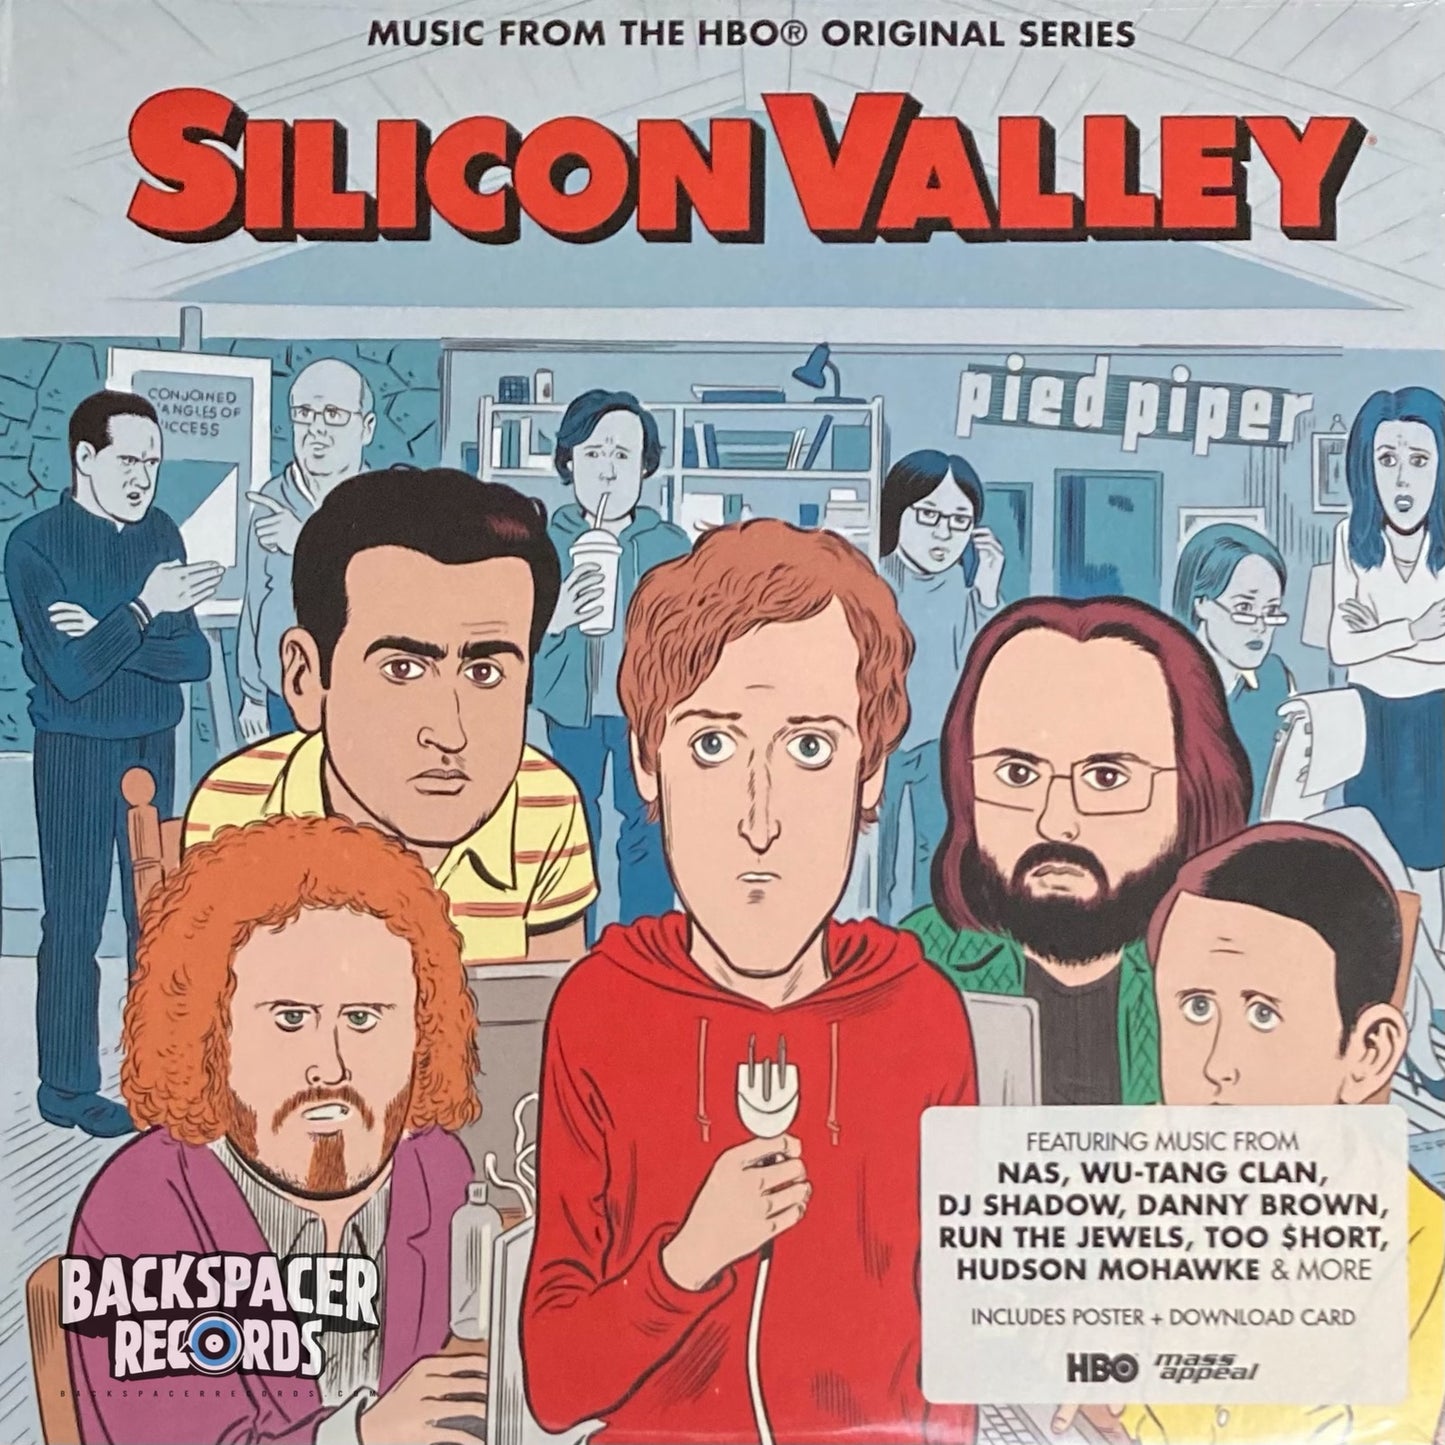 Silicon Valley: Music From The HBO Original Series - Various Artists LP (Sealed)